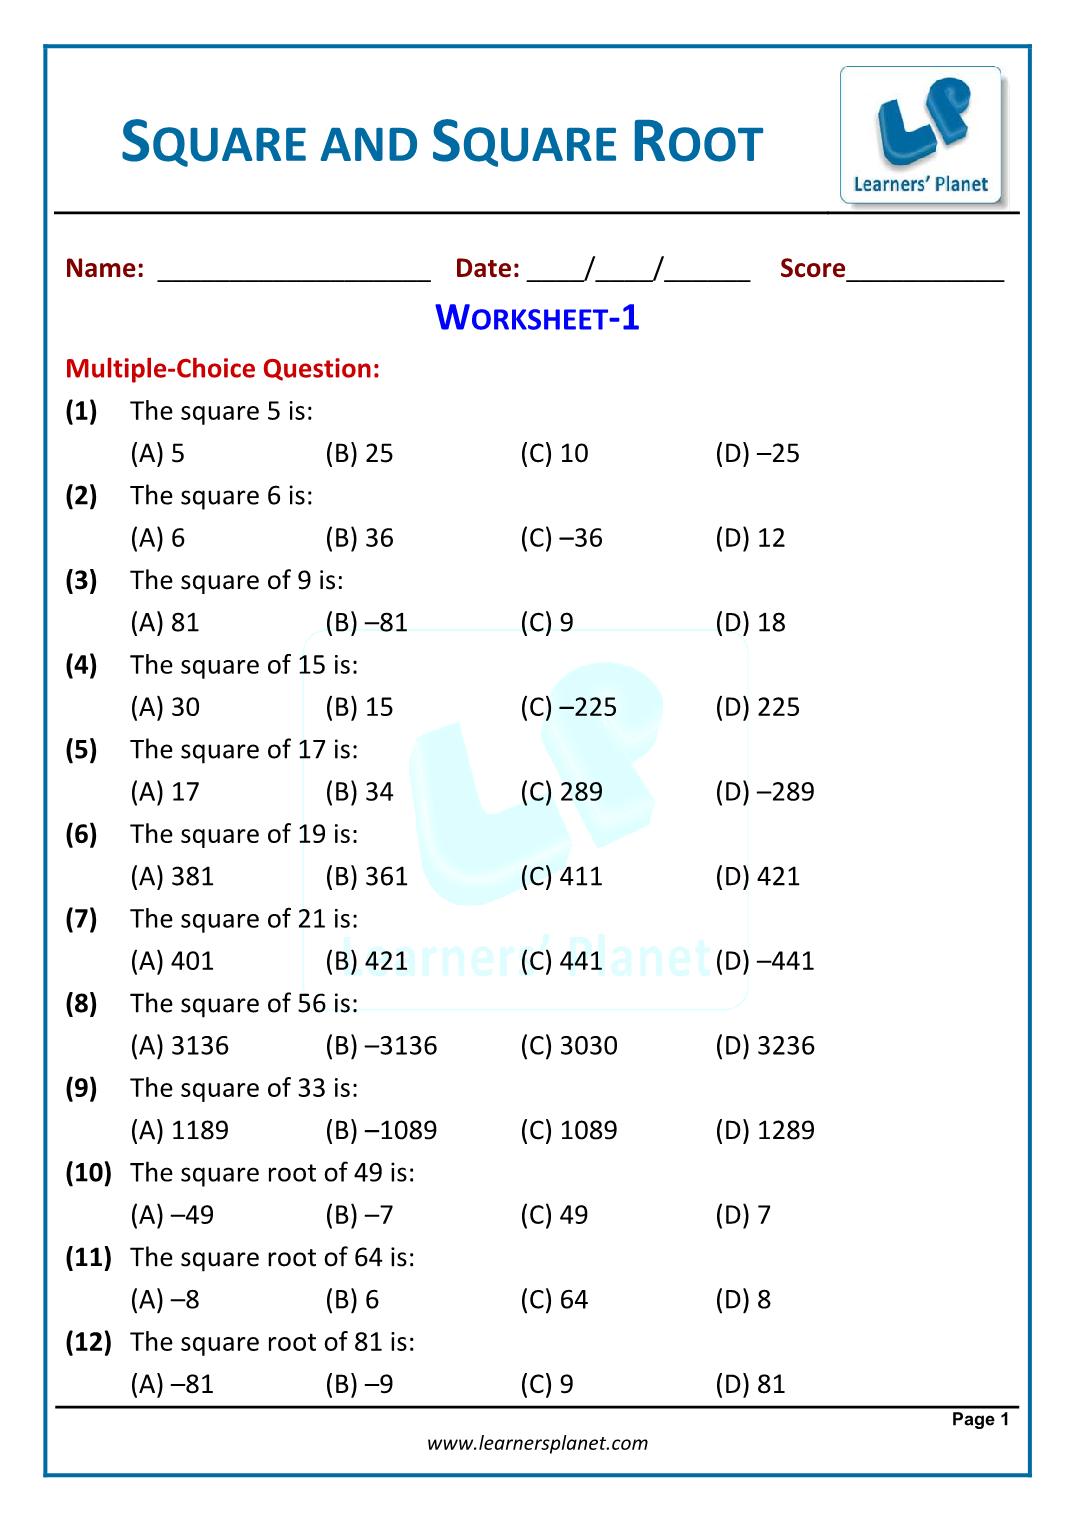 NCERT grade viii math squares and square roots videos, quiz Within Square Root Worksheet Pdf